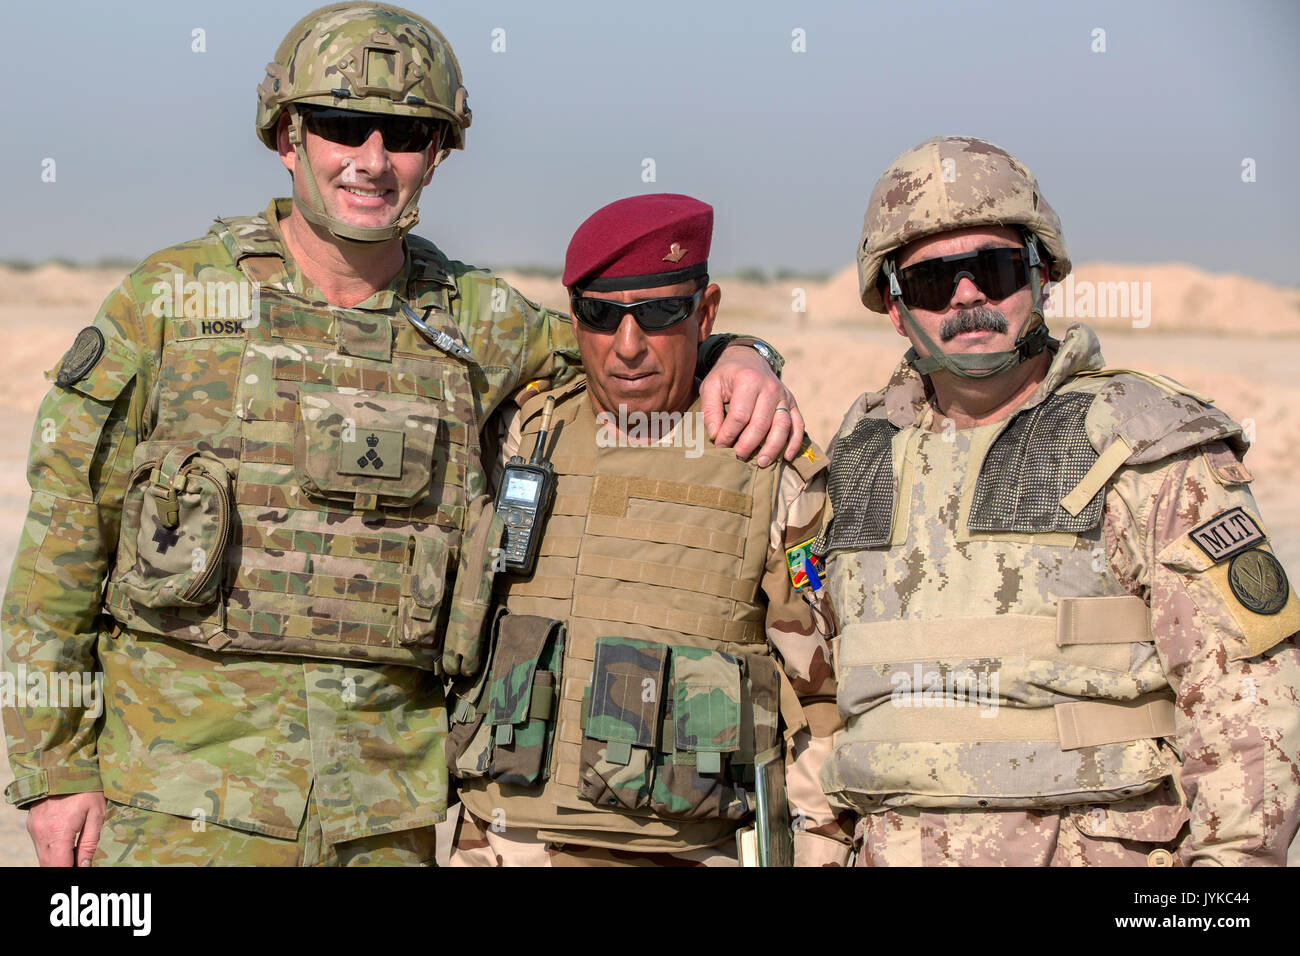 Australian Brig. Gen. Rupert Hoskin, Combined Joint Task Force-Operation Inherent Resolve, director CJ5, left, and Canadian Brig. Gen. Steve Whelan, Combined Joint Task Force-Operation Inherent Resolve, CJ7, pose for a photo with an Iraqi security forces officer during a battlefield circuit at the Besmaya Range Complex, Iraq, August 9, 2017. The Besmaya Range Complex is one of four Combined Joint Task Force - Operation Inherent Resolve building partner capacity locations dedicated to training partner forces and enhancing their effectiveness on the battlefield. CJTF-OIR is the global Coalition  Stock Photo